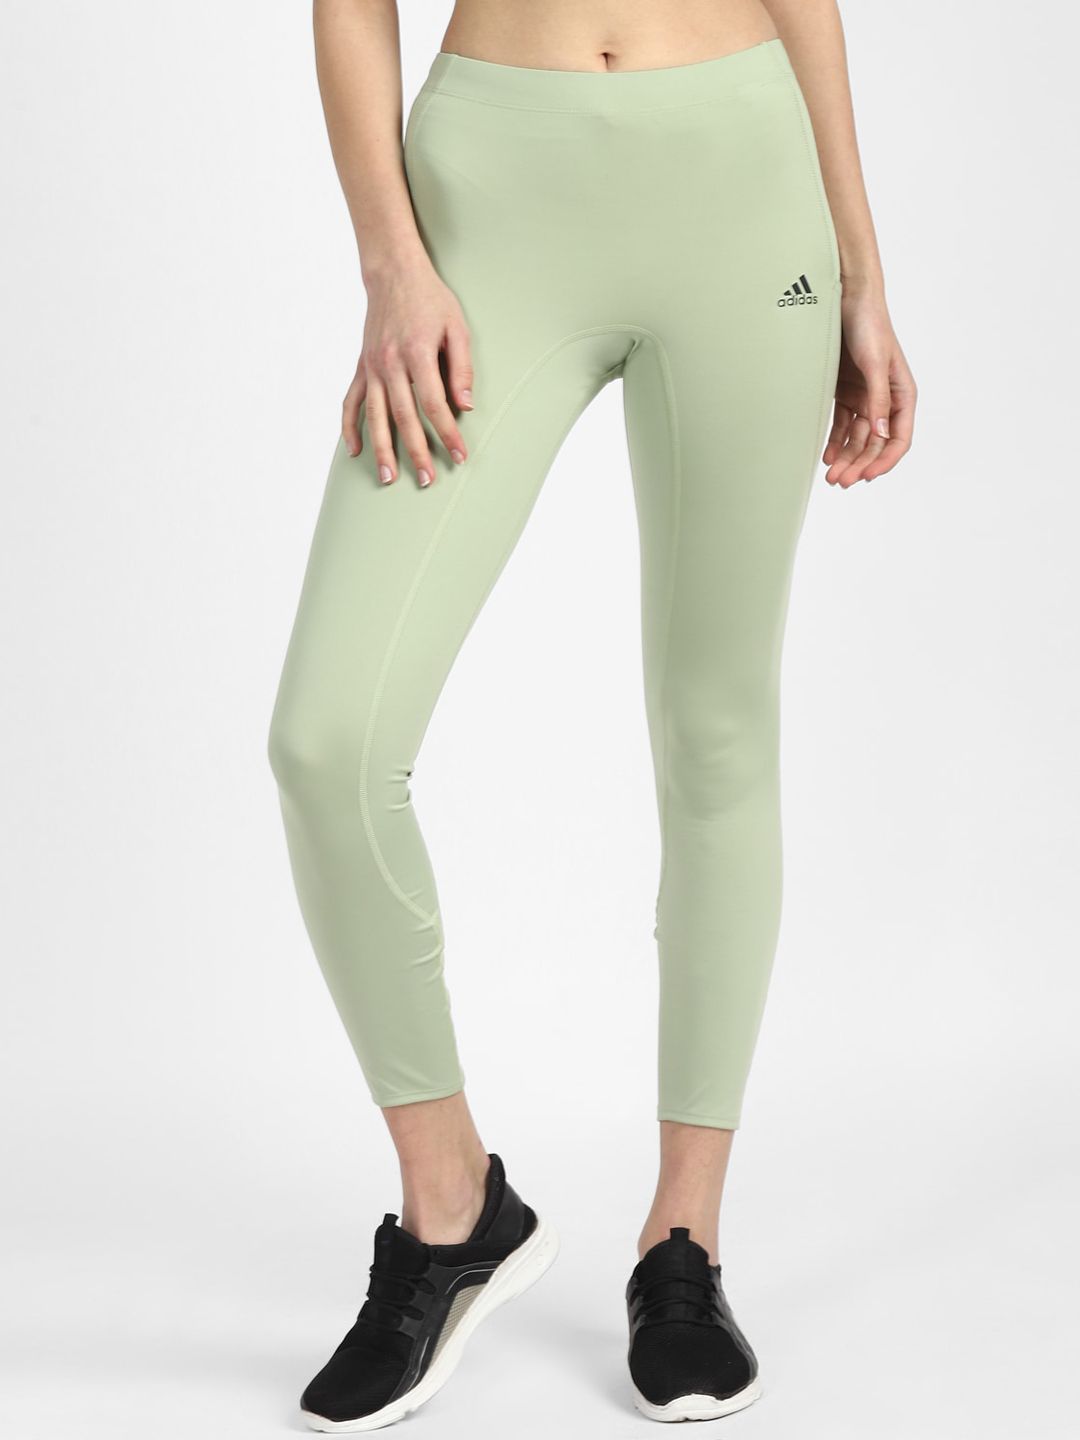 ADIDAS Women Green Solid Sports Tights Price in India